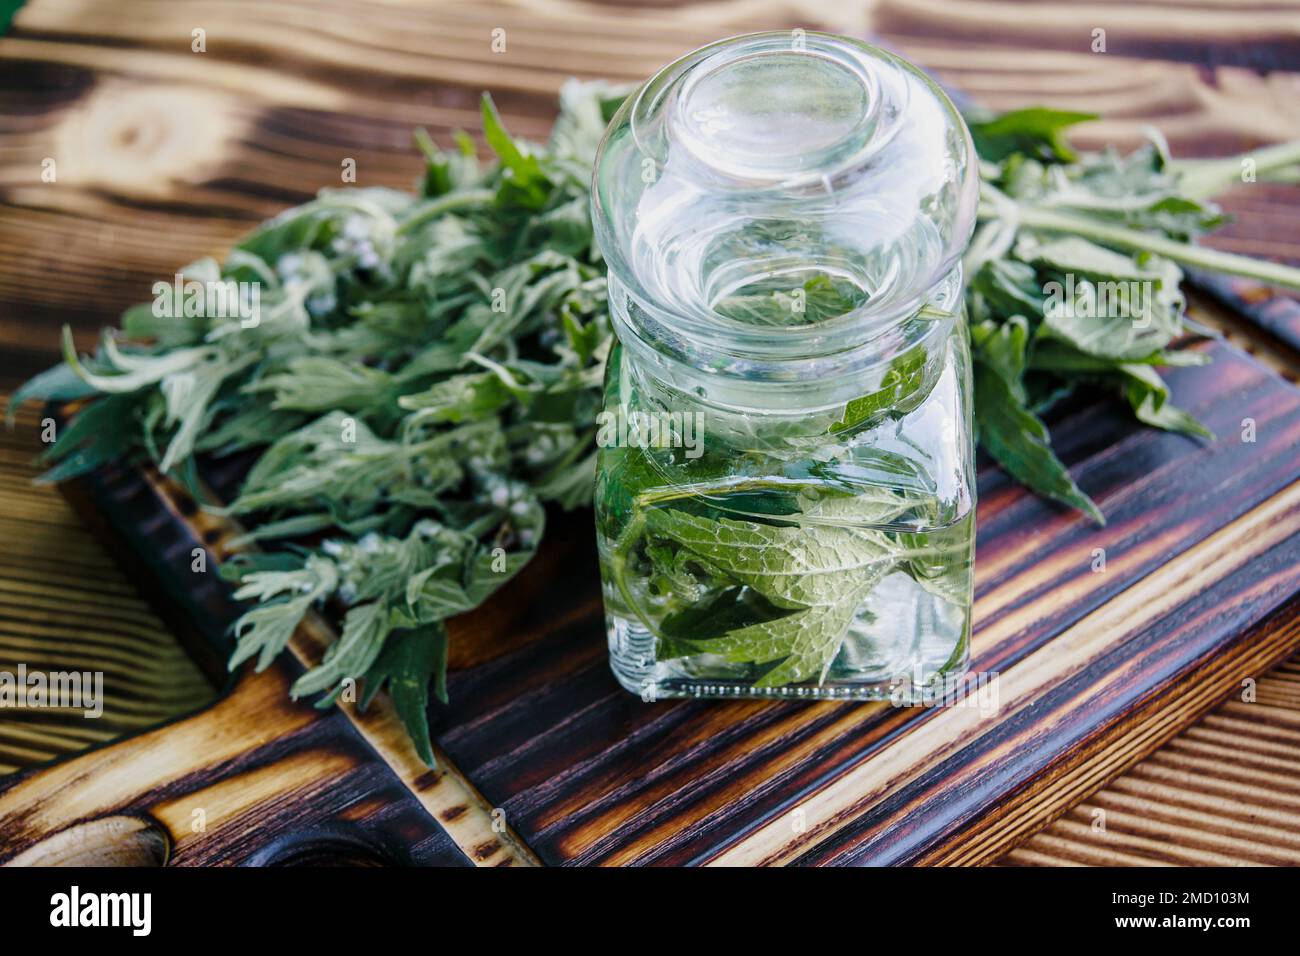 Leonurus cardiaca, motherwort, throw-wort, lion's ear, lion's tail medicinal plant . Transparent glass jar with condemned herbal. Ingredient for cosme Stock Photo